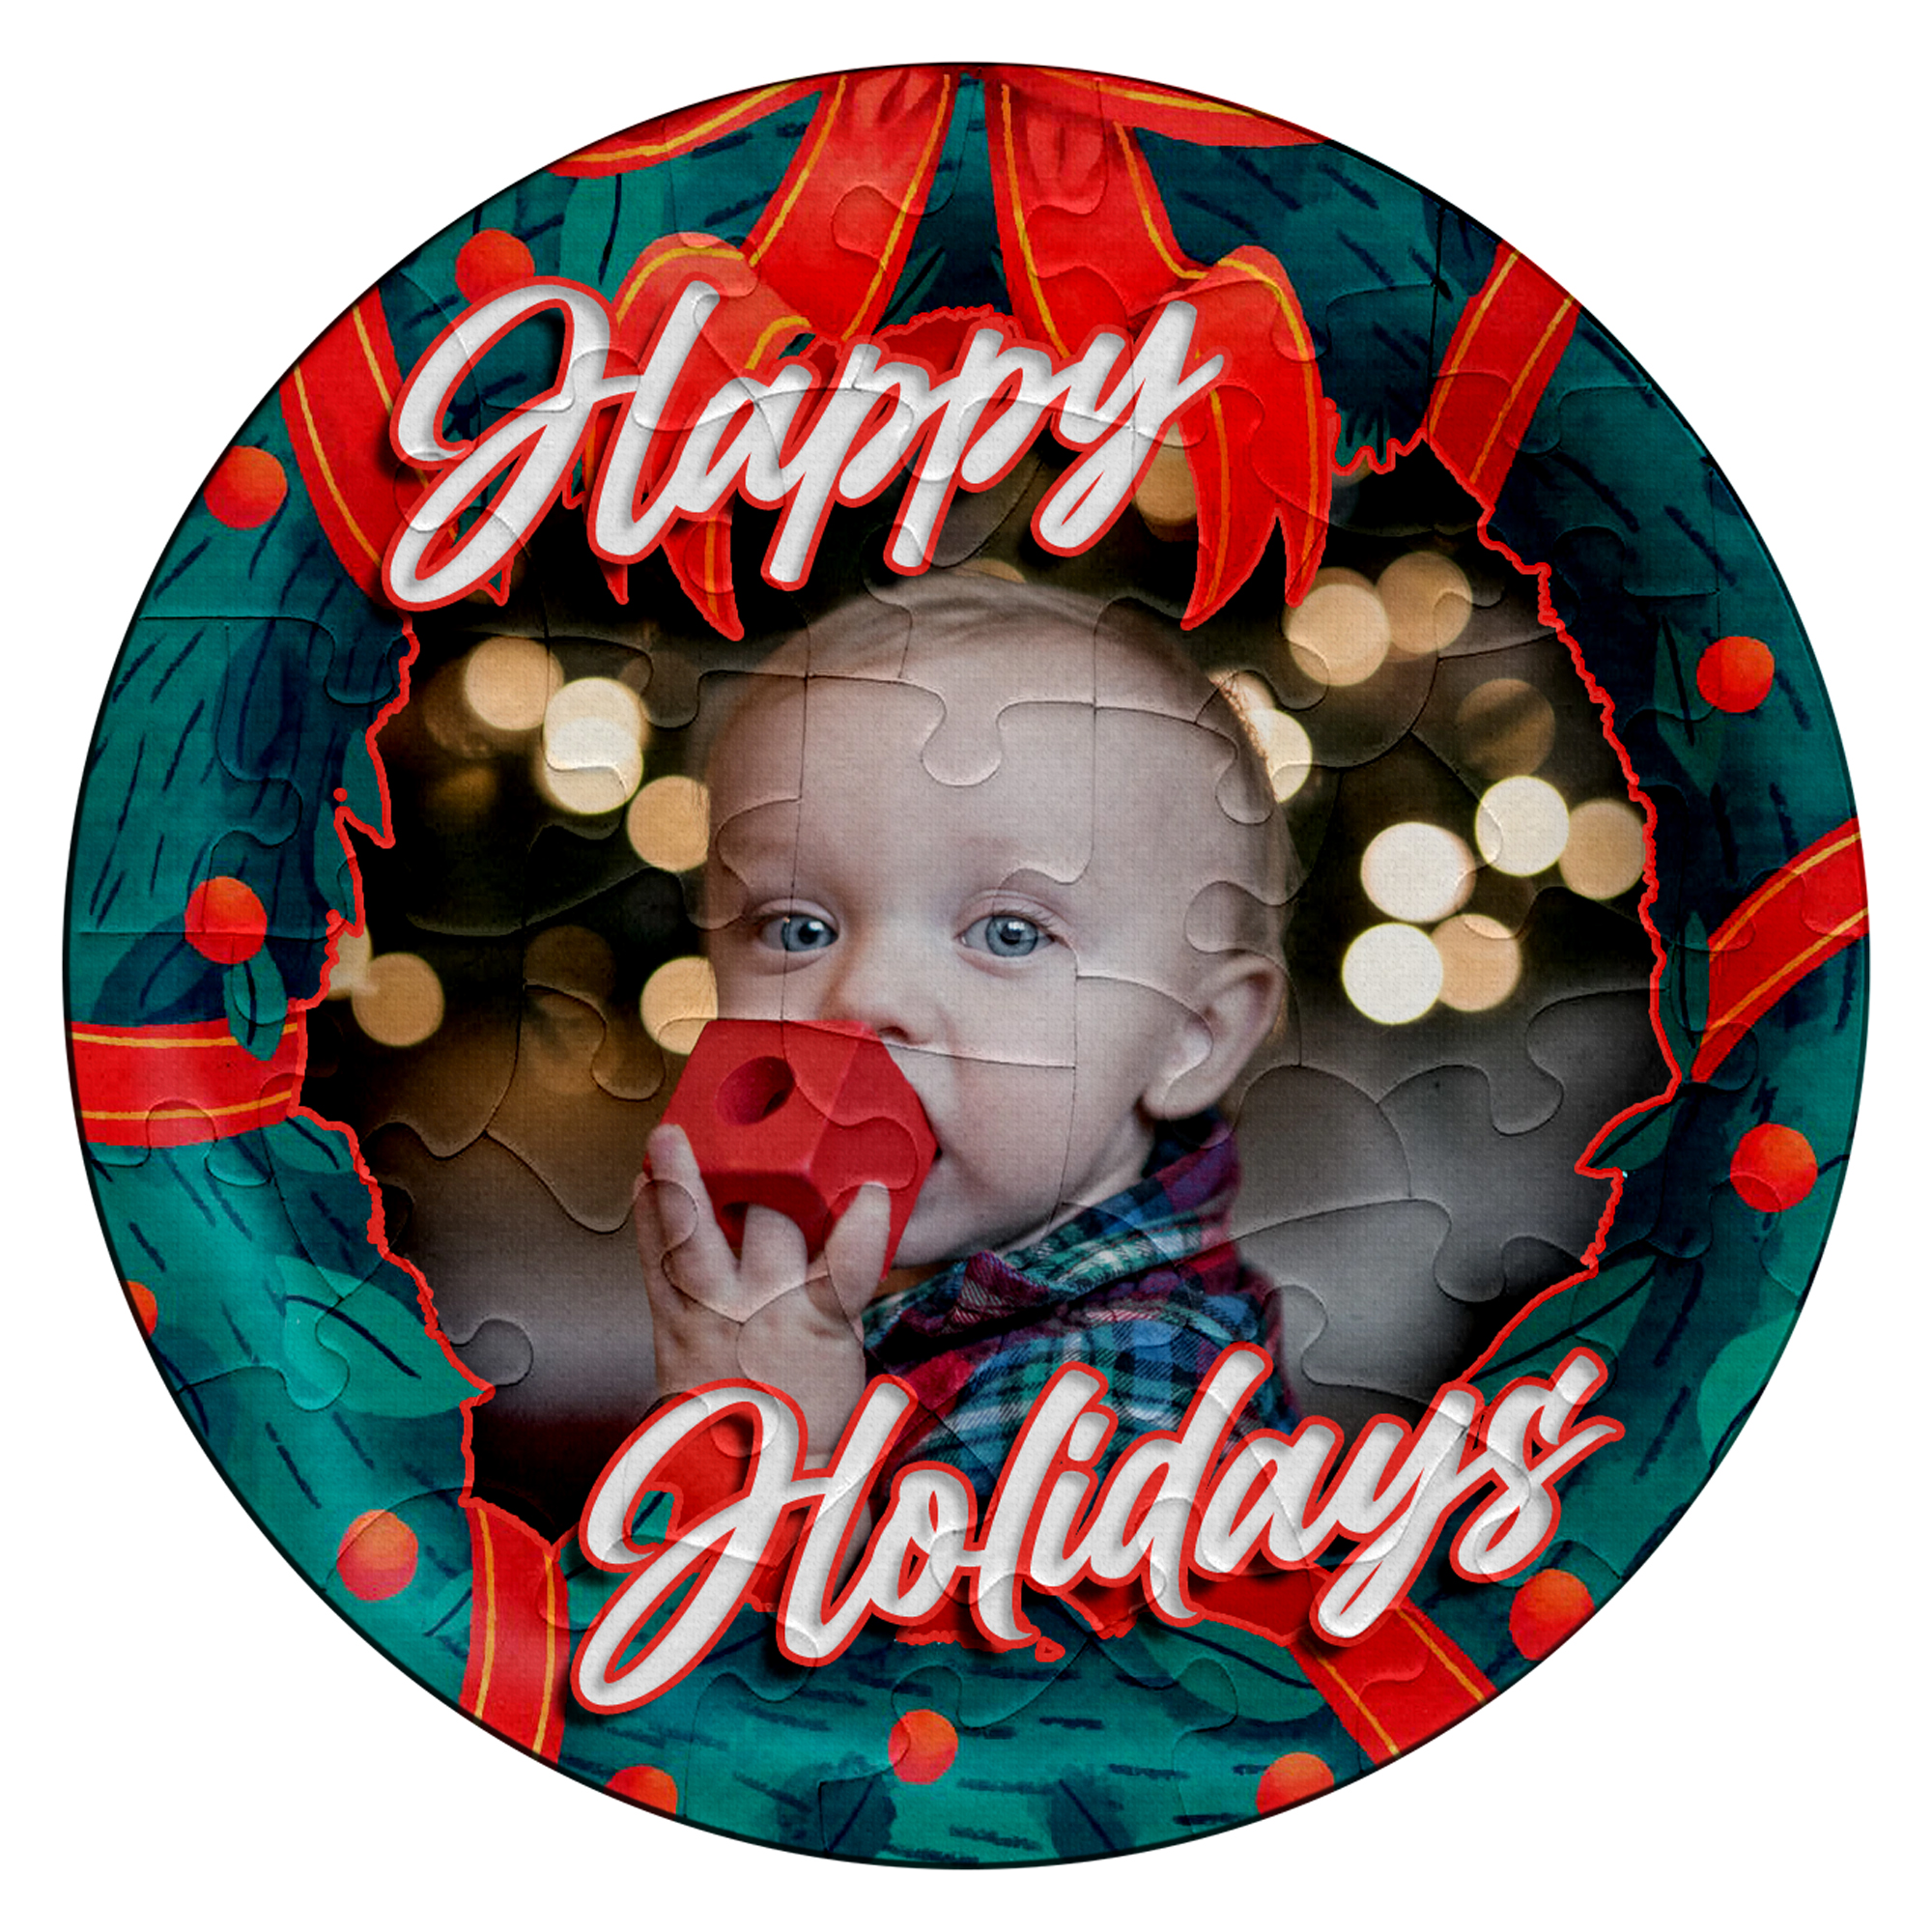 Christmas Custom Personalized Photo/Picture Puzzle Gift - Round Happy Holidays - 42pc